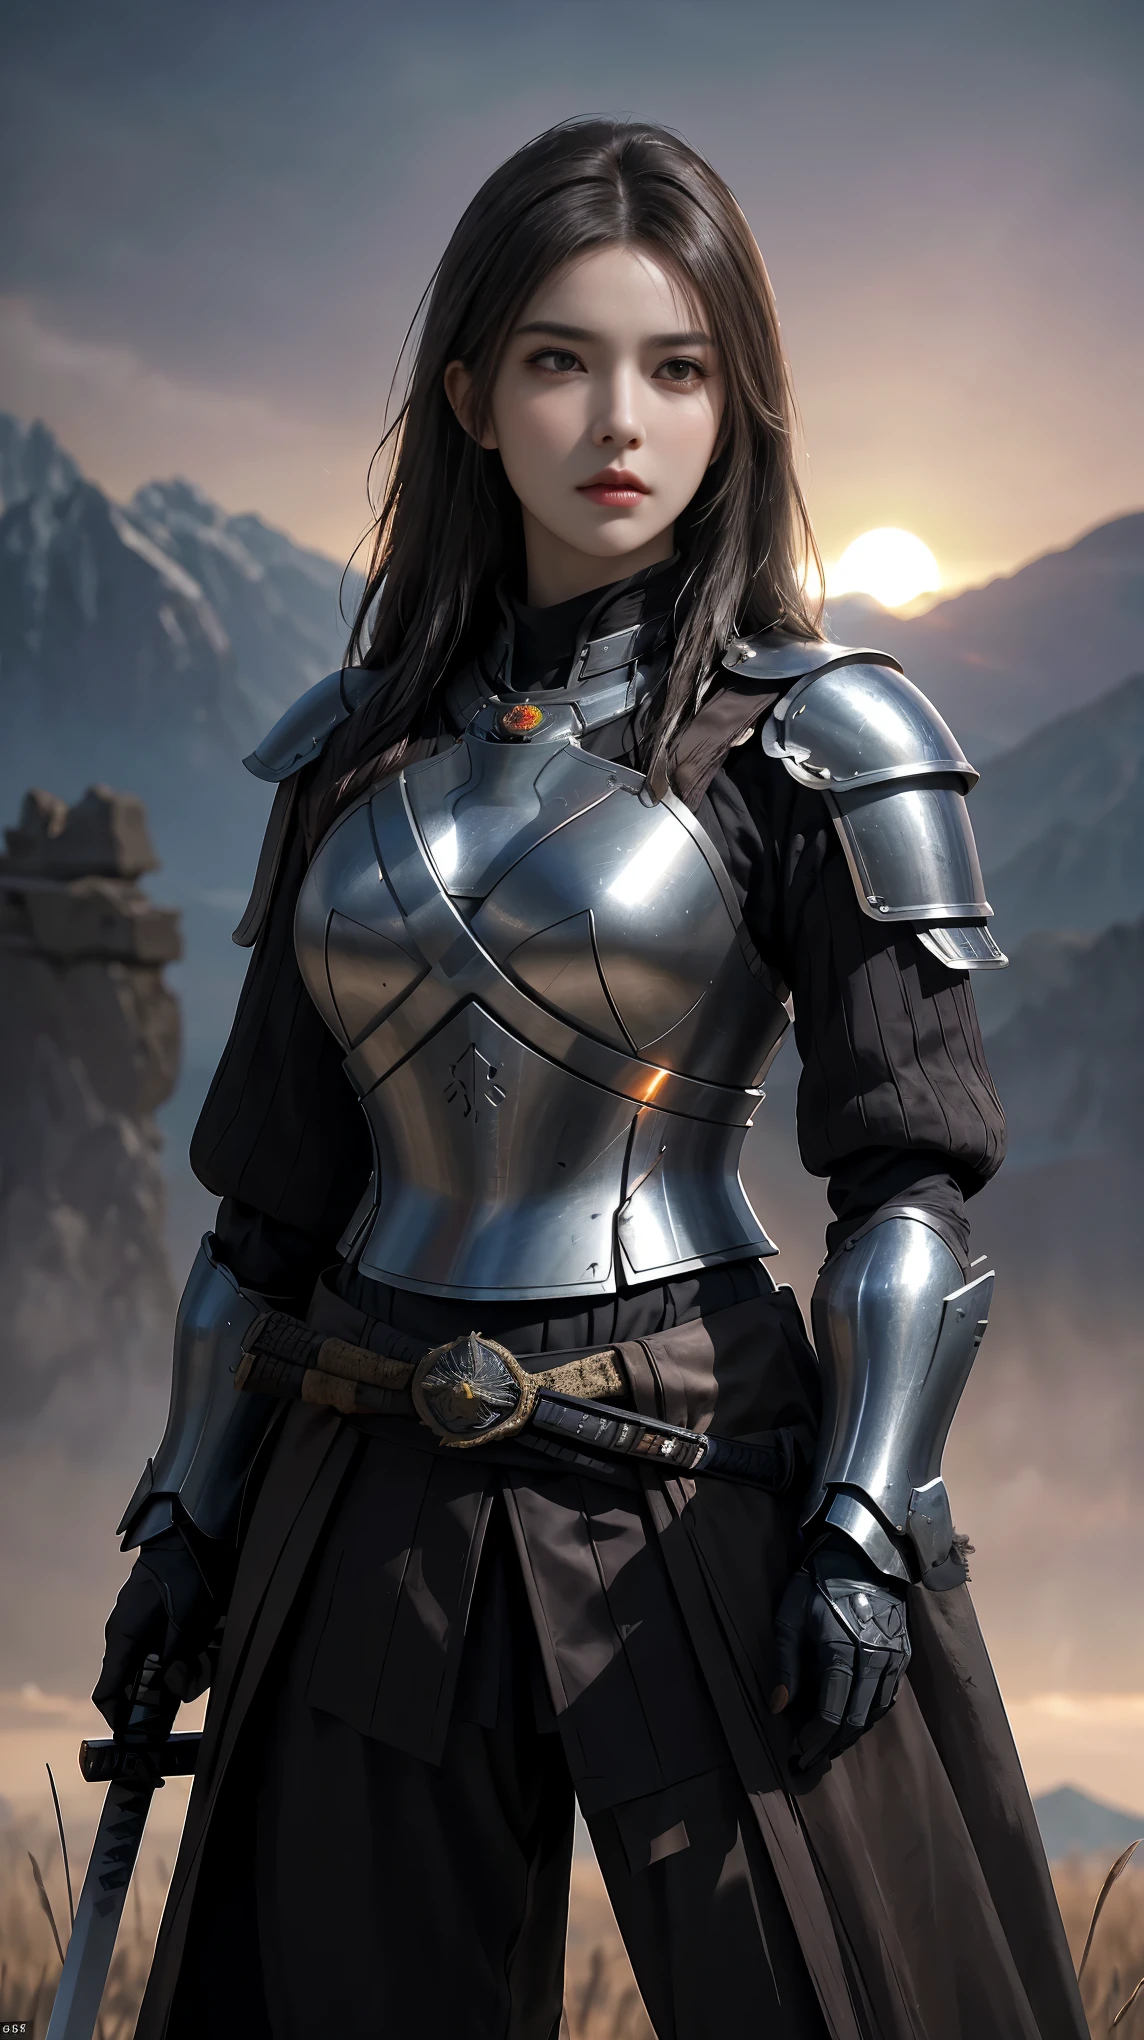 A fully armed warrior standing on a desolate field,backlit by the setting sun,gripping a sharp katana sword, determined eyes,warrior armor,sturdy armor,medieval armor,armor details,complex armor design,stoic stance,desolate landscape,sunset backdrop,detailed landscape,clear skies,best quality,4k,8k,highres,masterpiece:1.2,ultra-detailed,realistic,photorealistic,photo-realistic:1.37,HDR,UHD,studio lighting,ultra-fine painting,sharp focus,professional,portrait,sci-fi,vivid colors,warm color tones, dramatic lighting